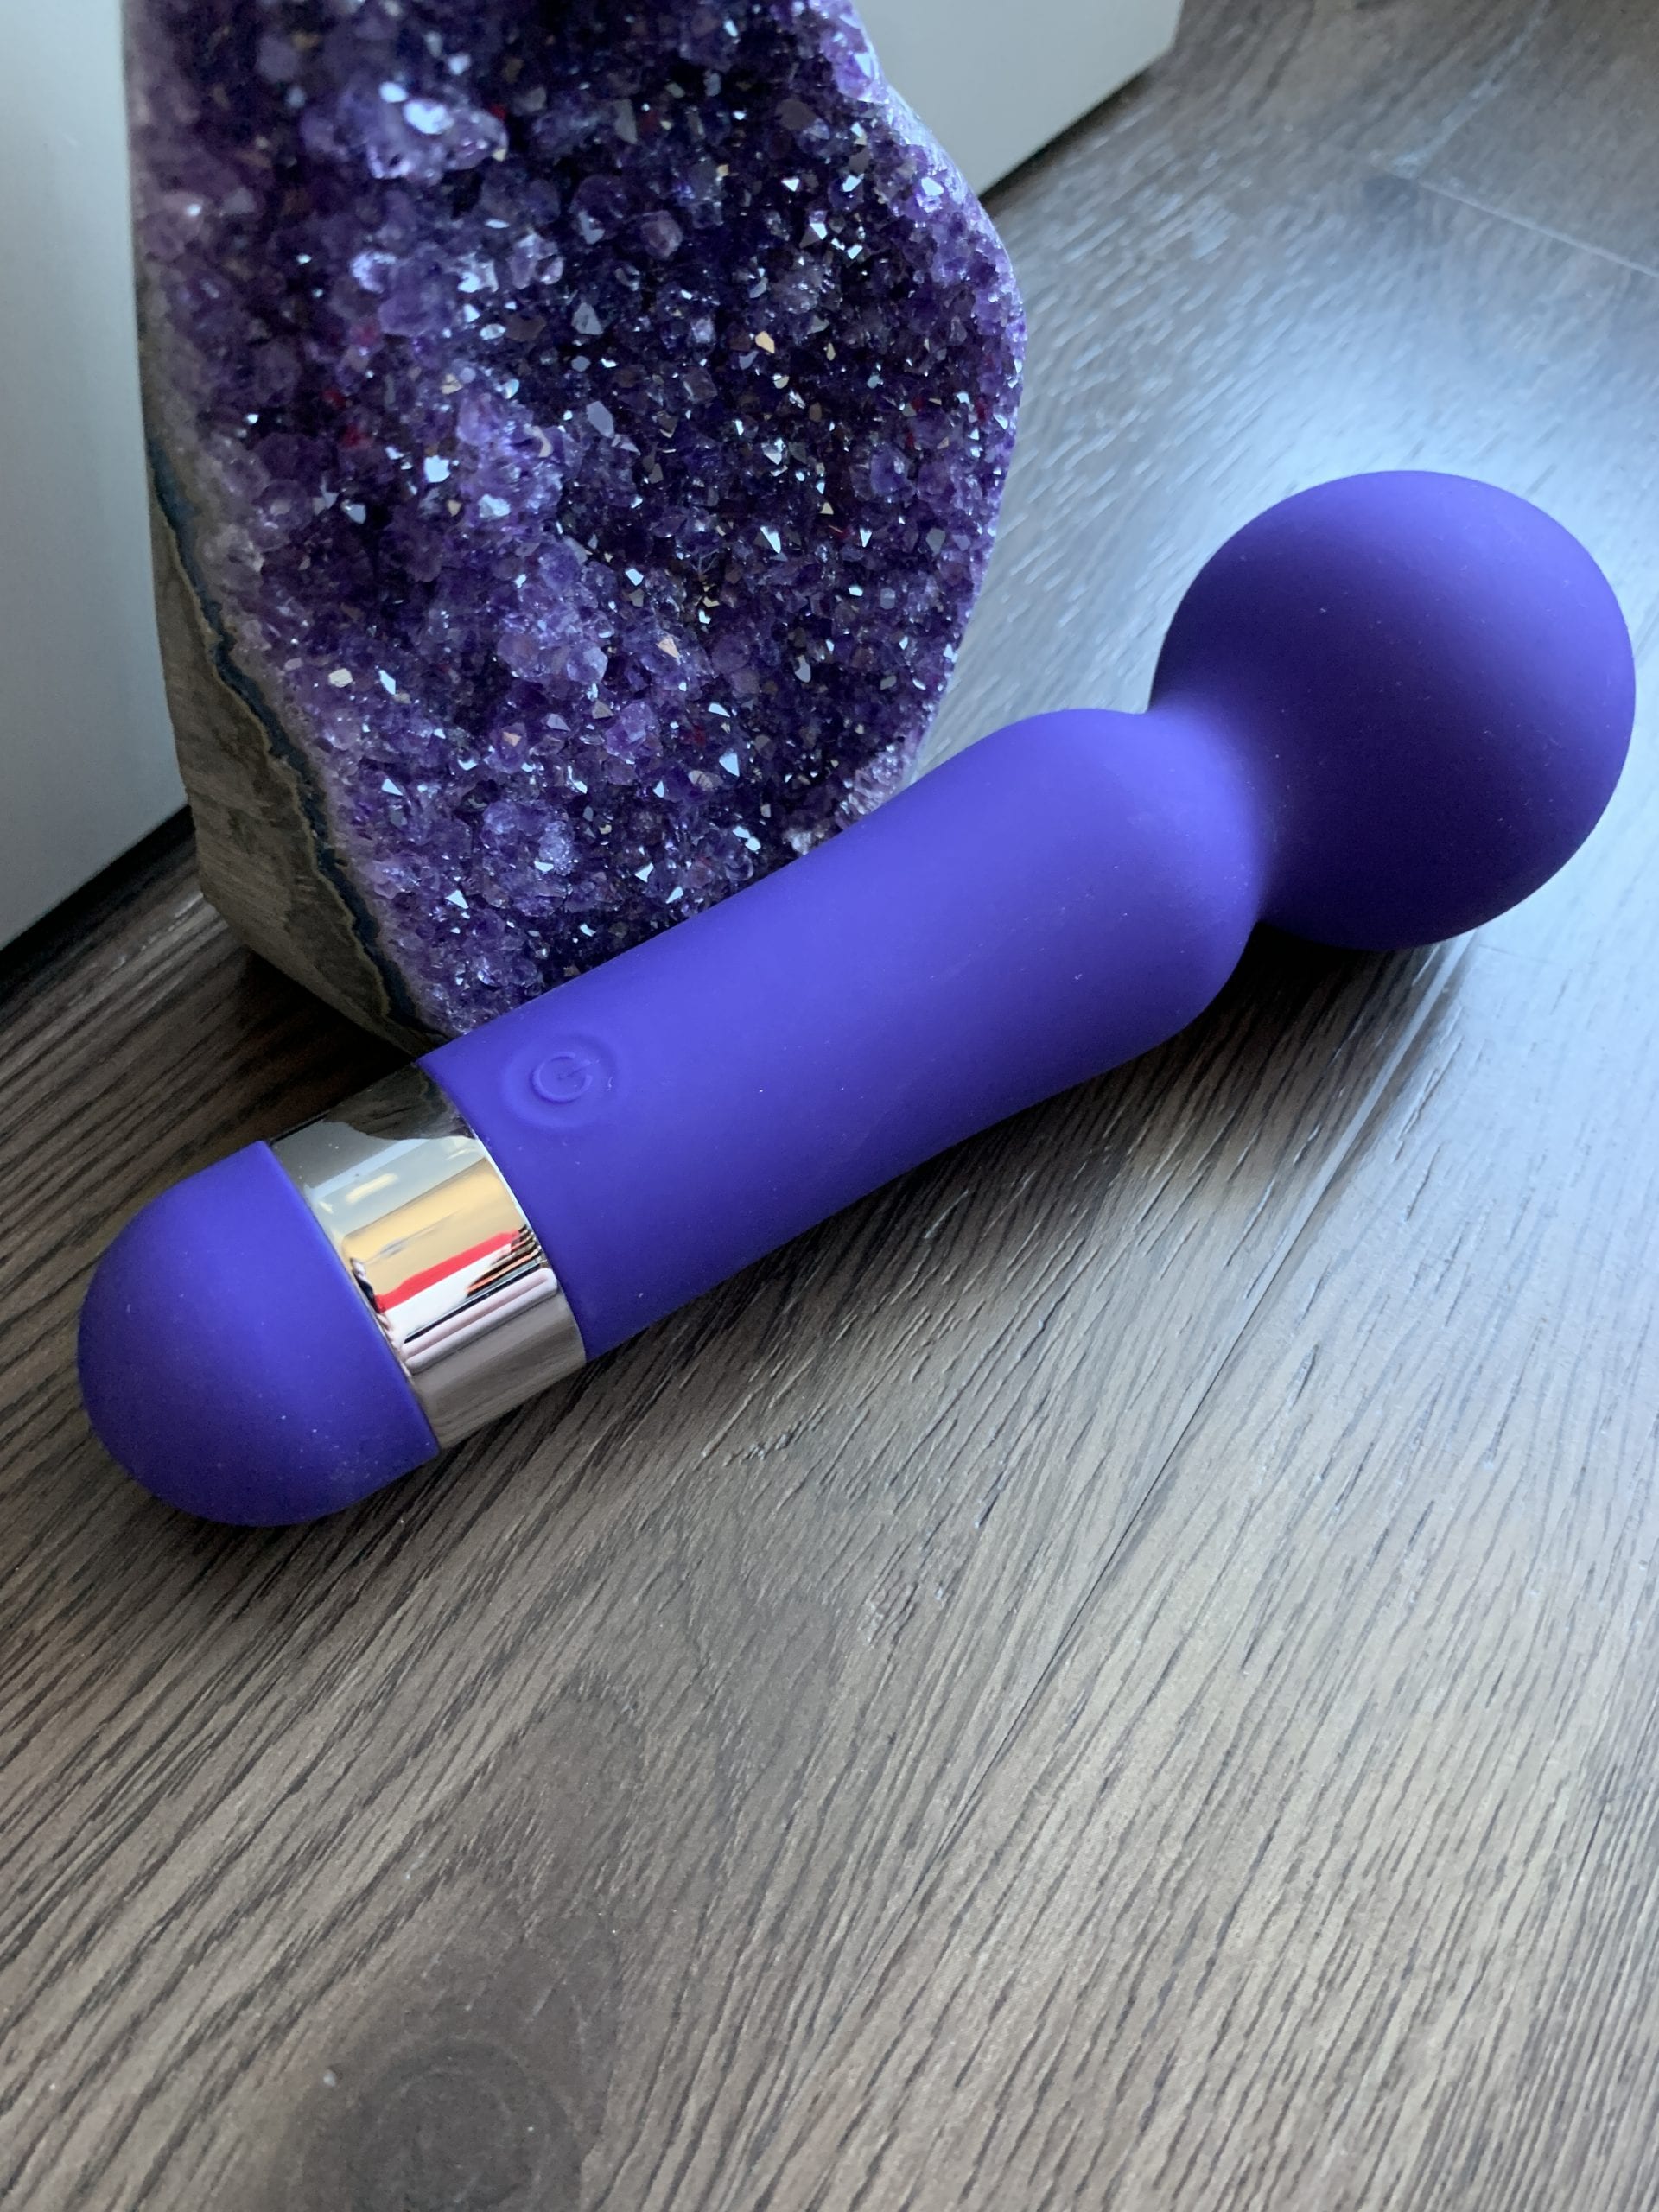 REVIEW: Tracey Cox Supersex Soft Feel Wand Vibrator